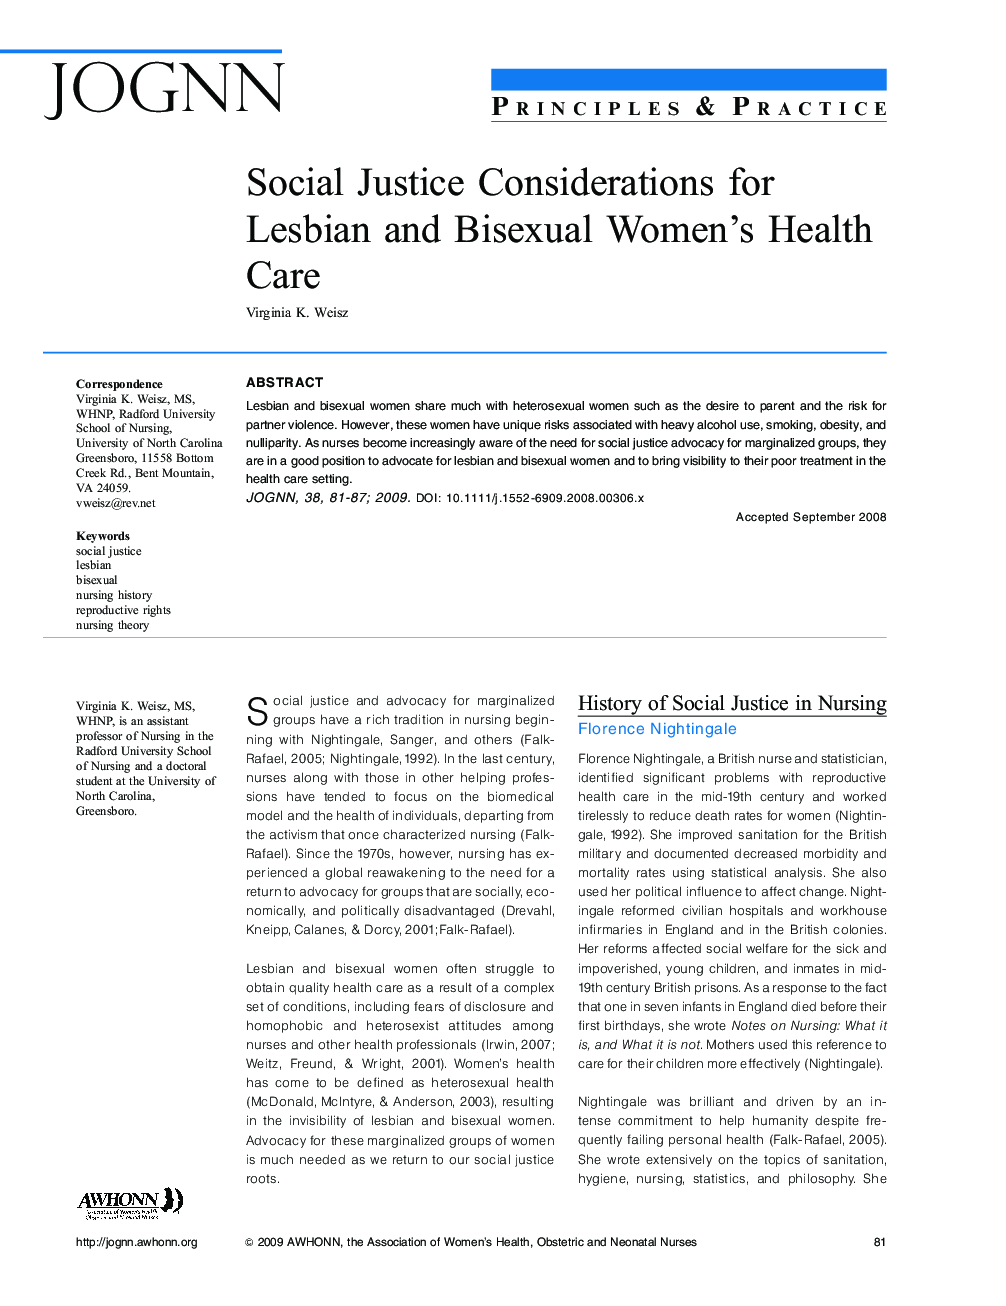 Social Justice Considerations for Lesbian and Bisexual Women's Health Care